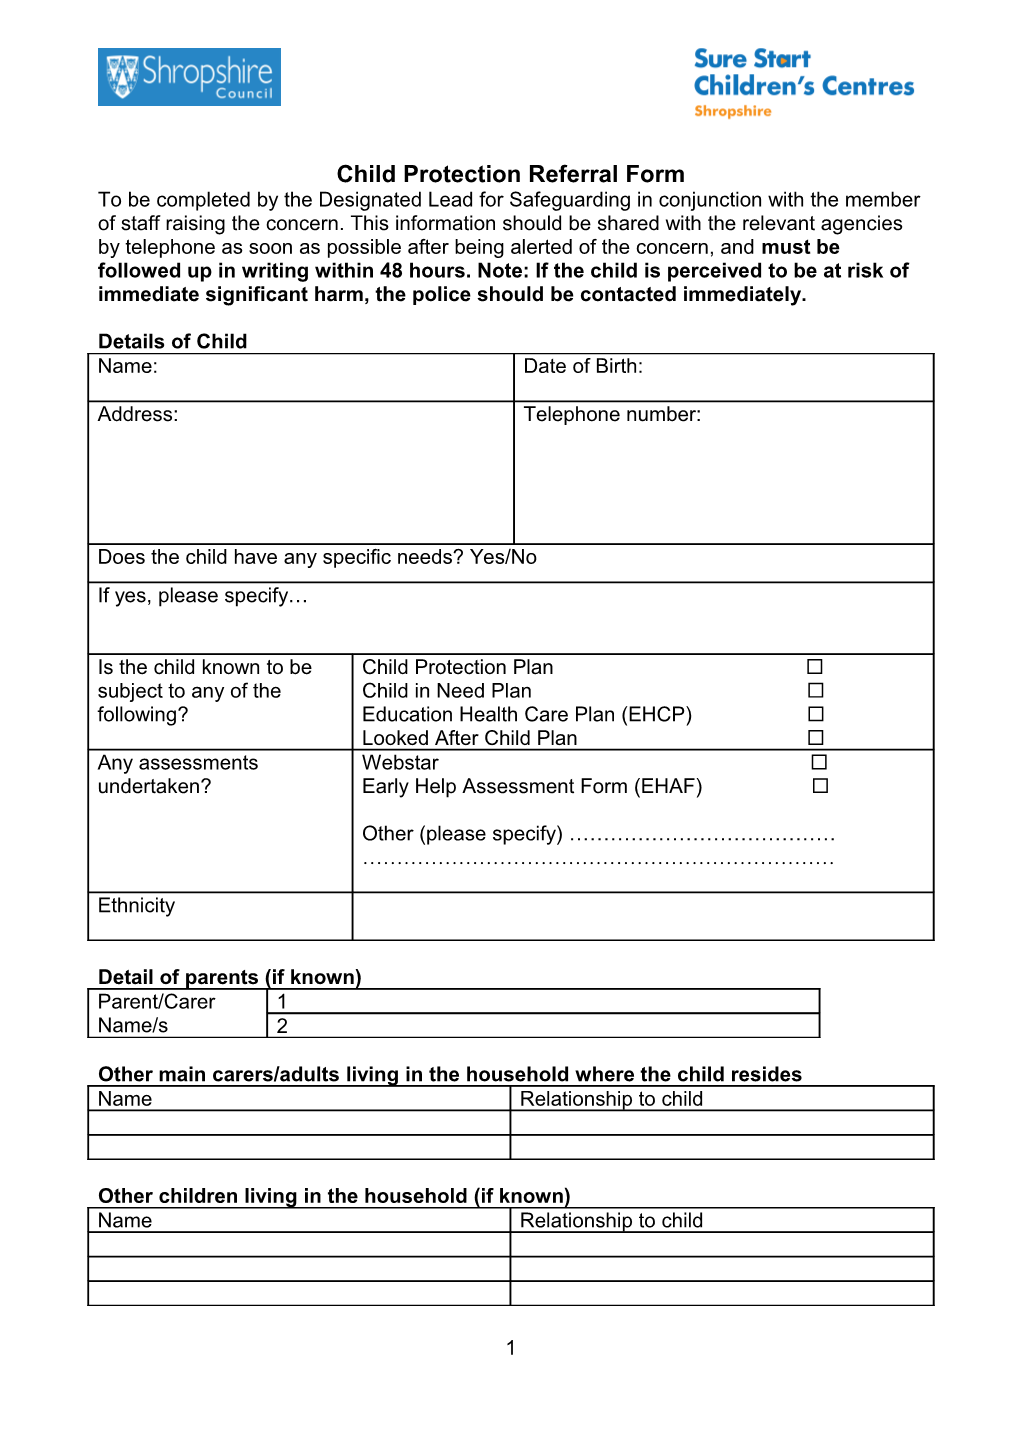 Child Protection Referral Procedure